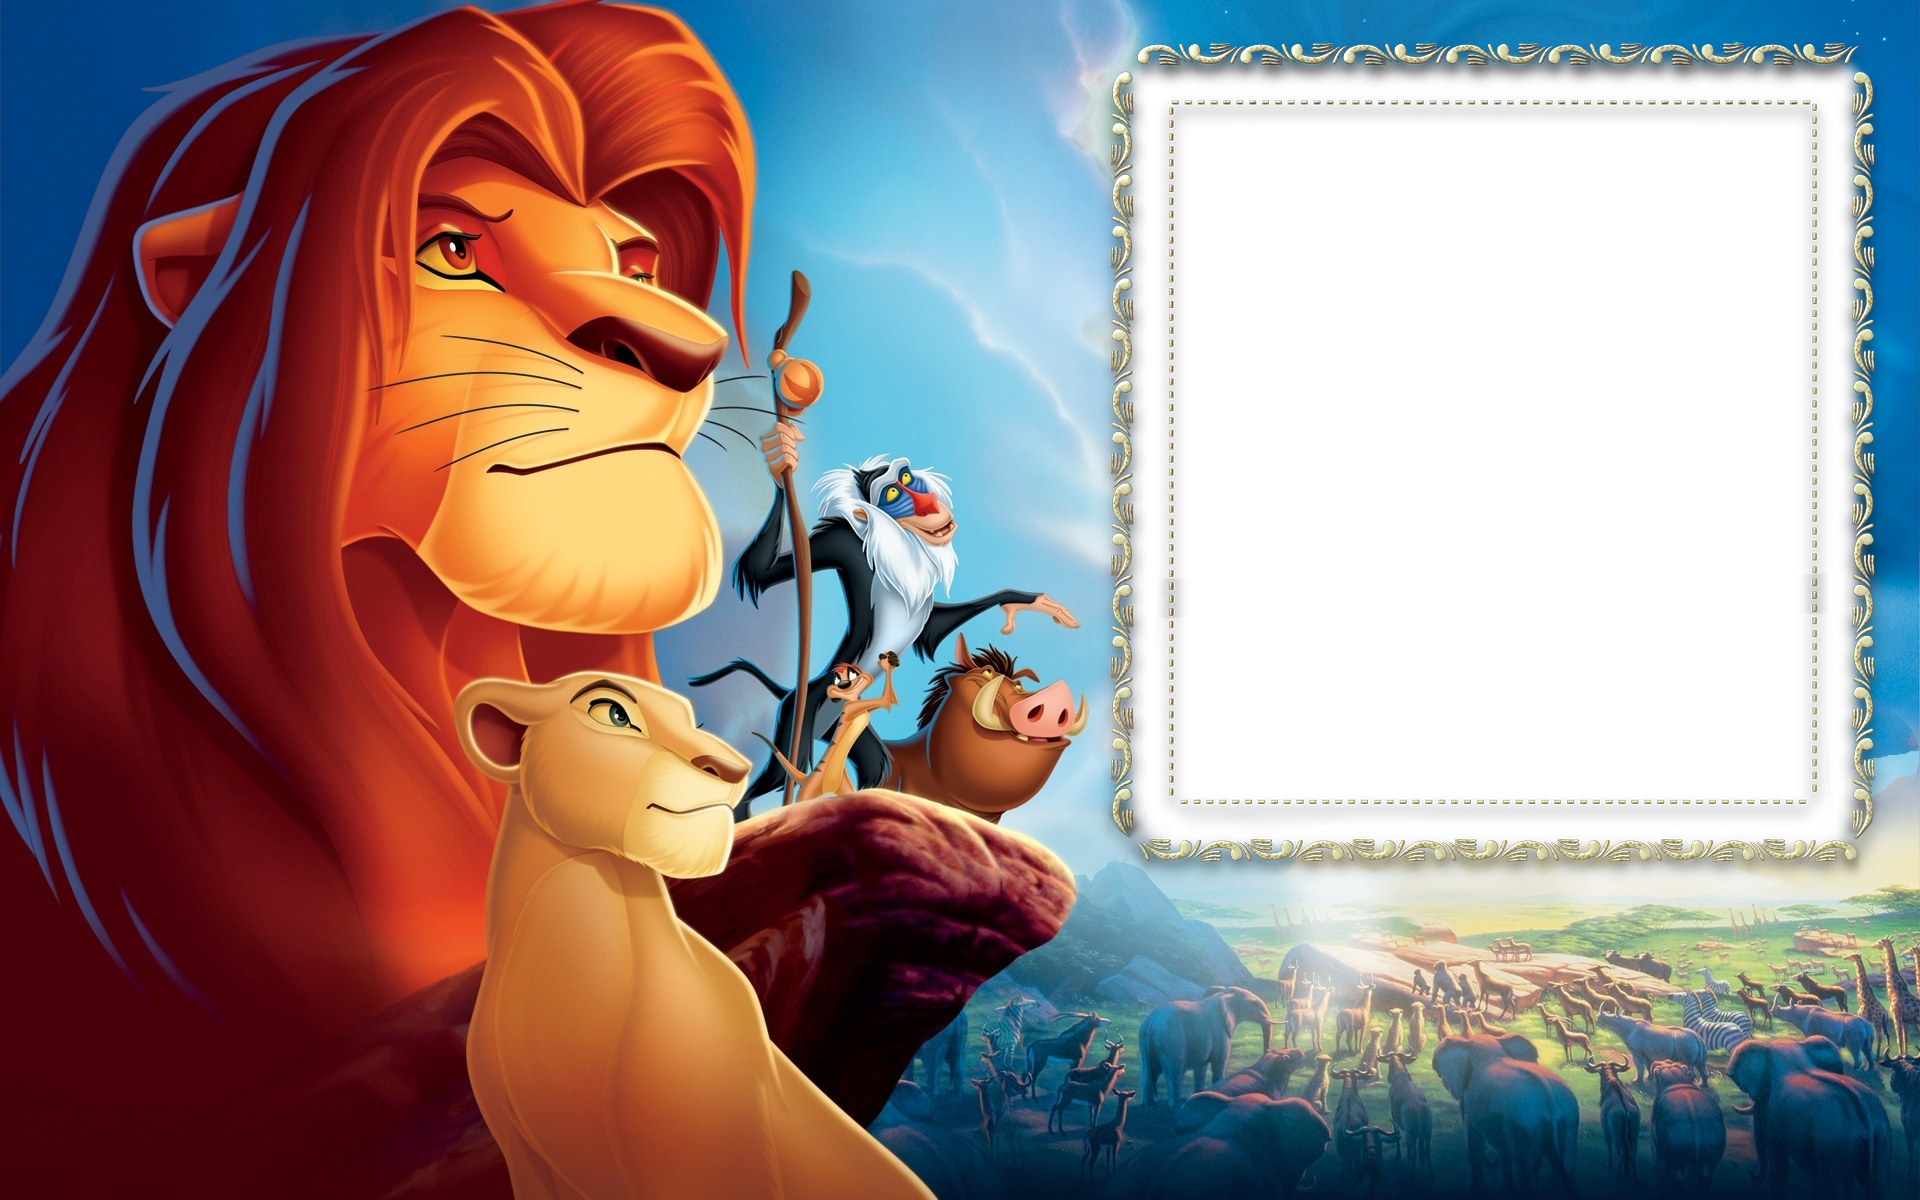 lion king clipart for kids